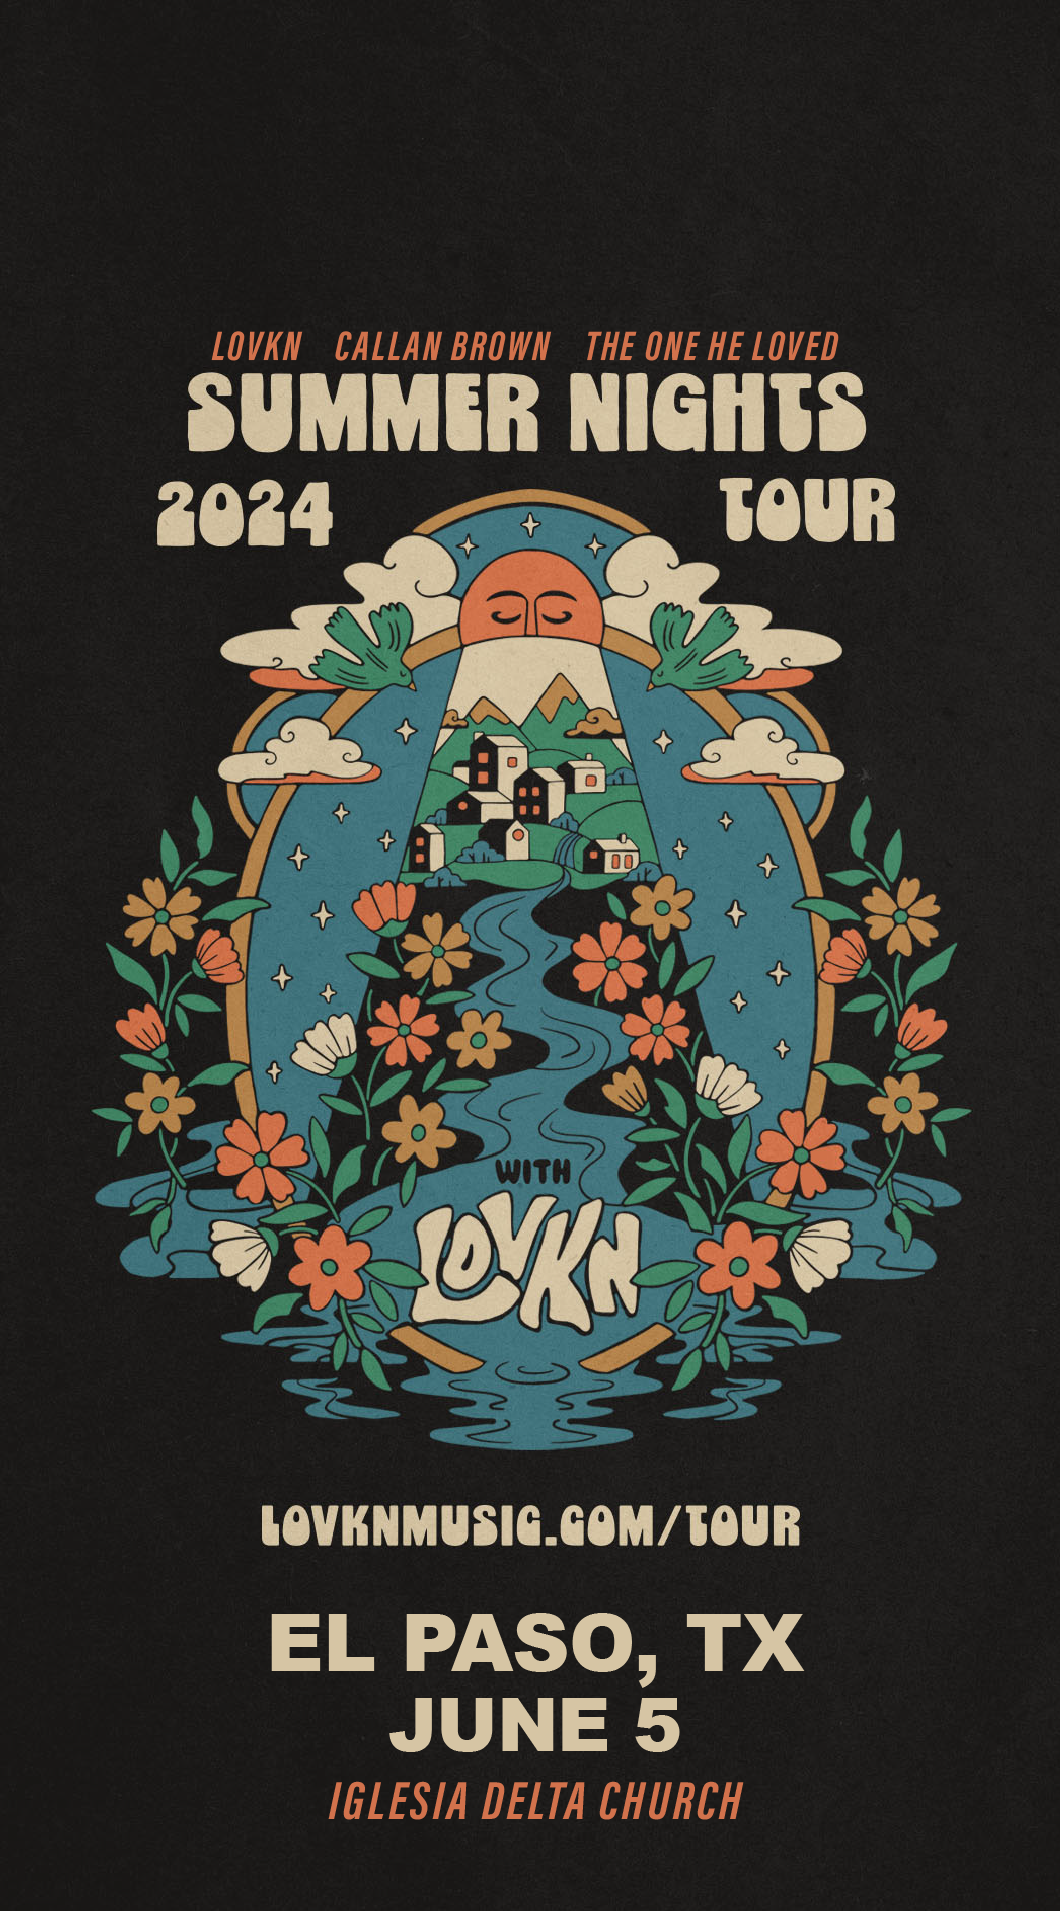 El Paso, TX | June 5 | LOVKN Summer Nights Tour 2024 (w/Callan Brown, The One He Loved)